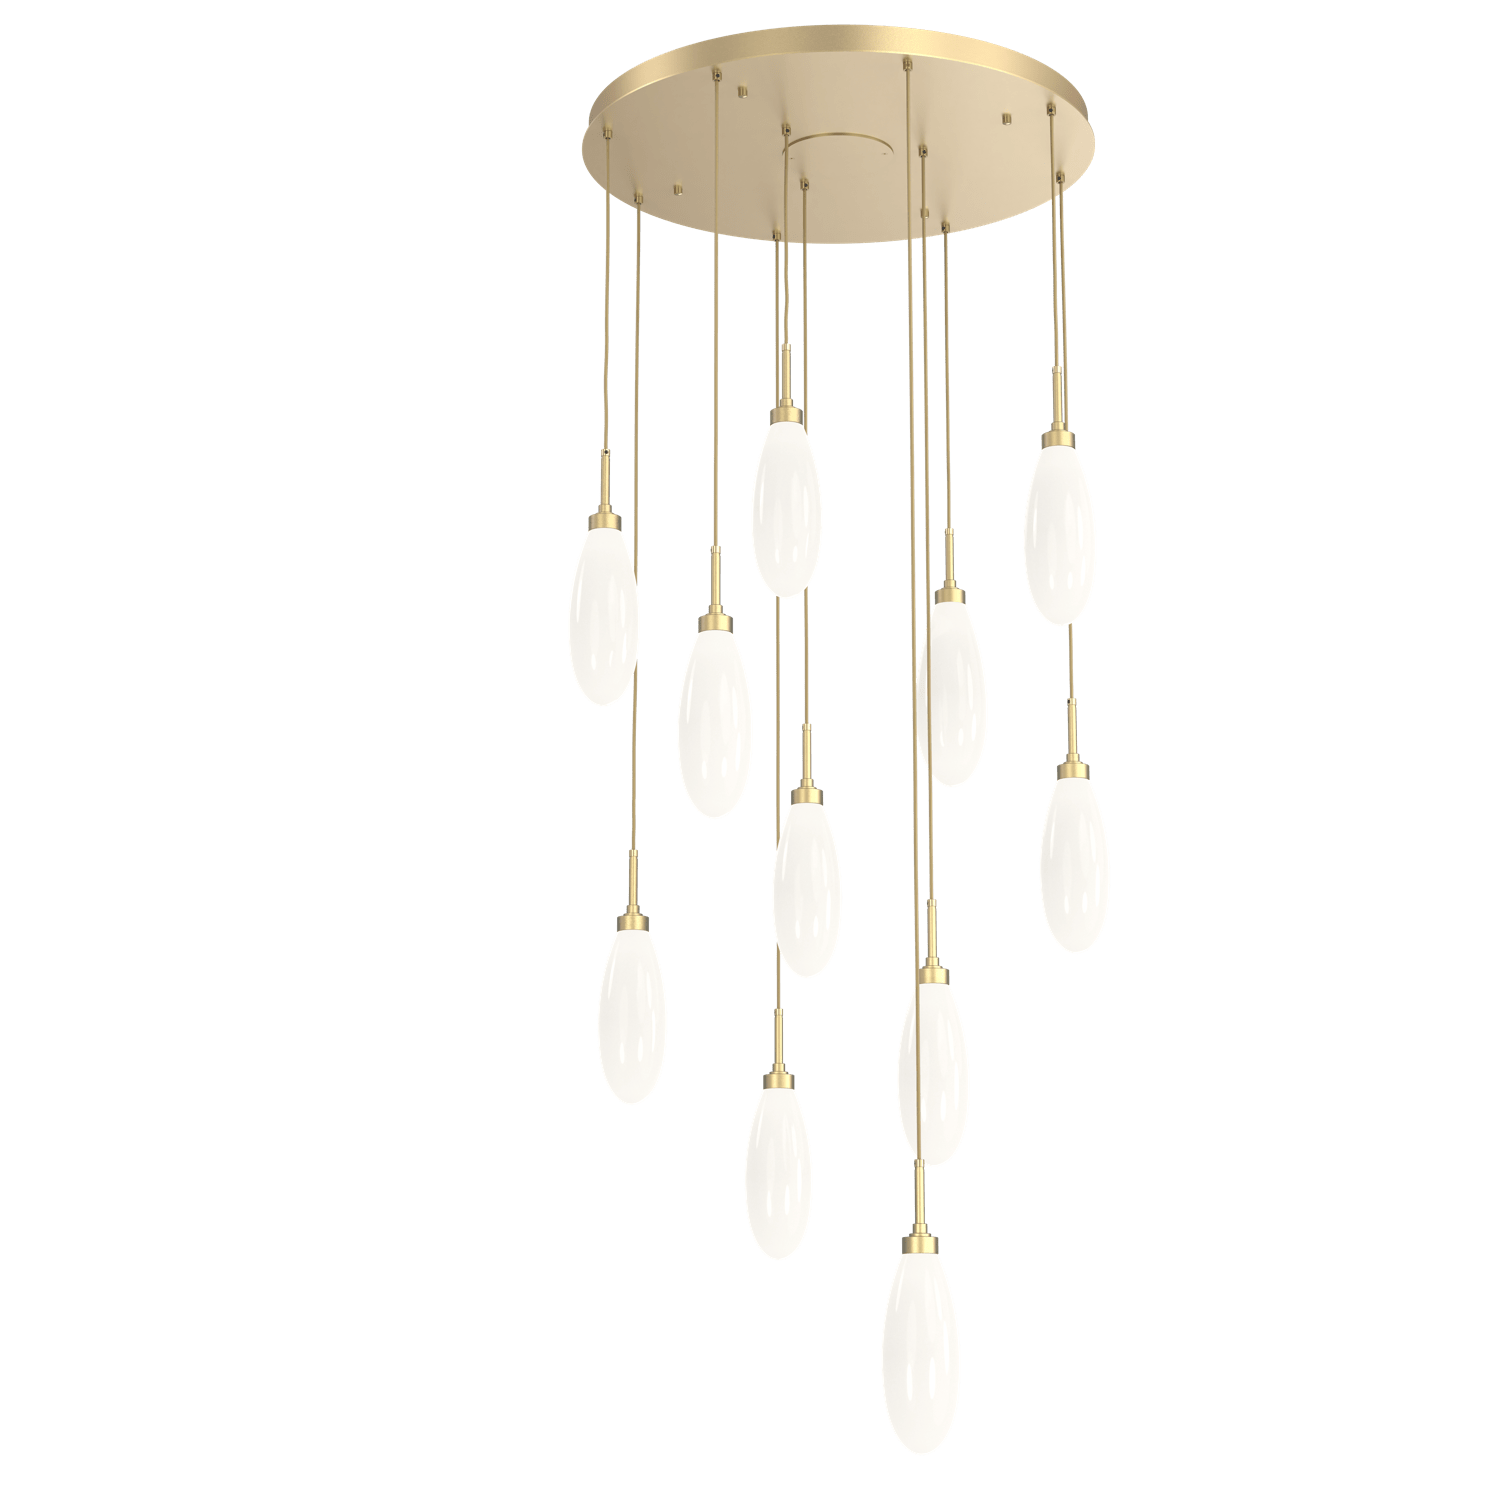 CHB0071-11-GB-WL-LL-Hammerton-Studio-Fiori-11-light-round-pendant-chandelier-with-gilded-brass-finish-and-opal-white-glass-shades-and-LED-lamping